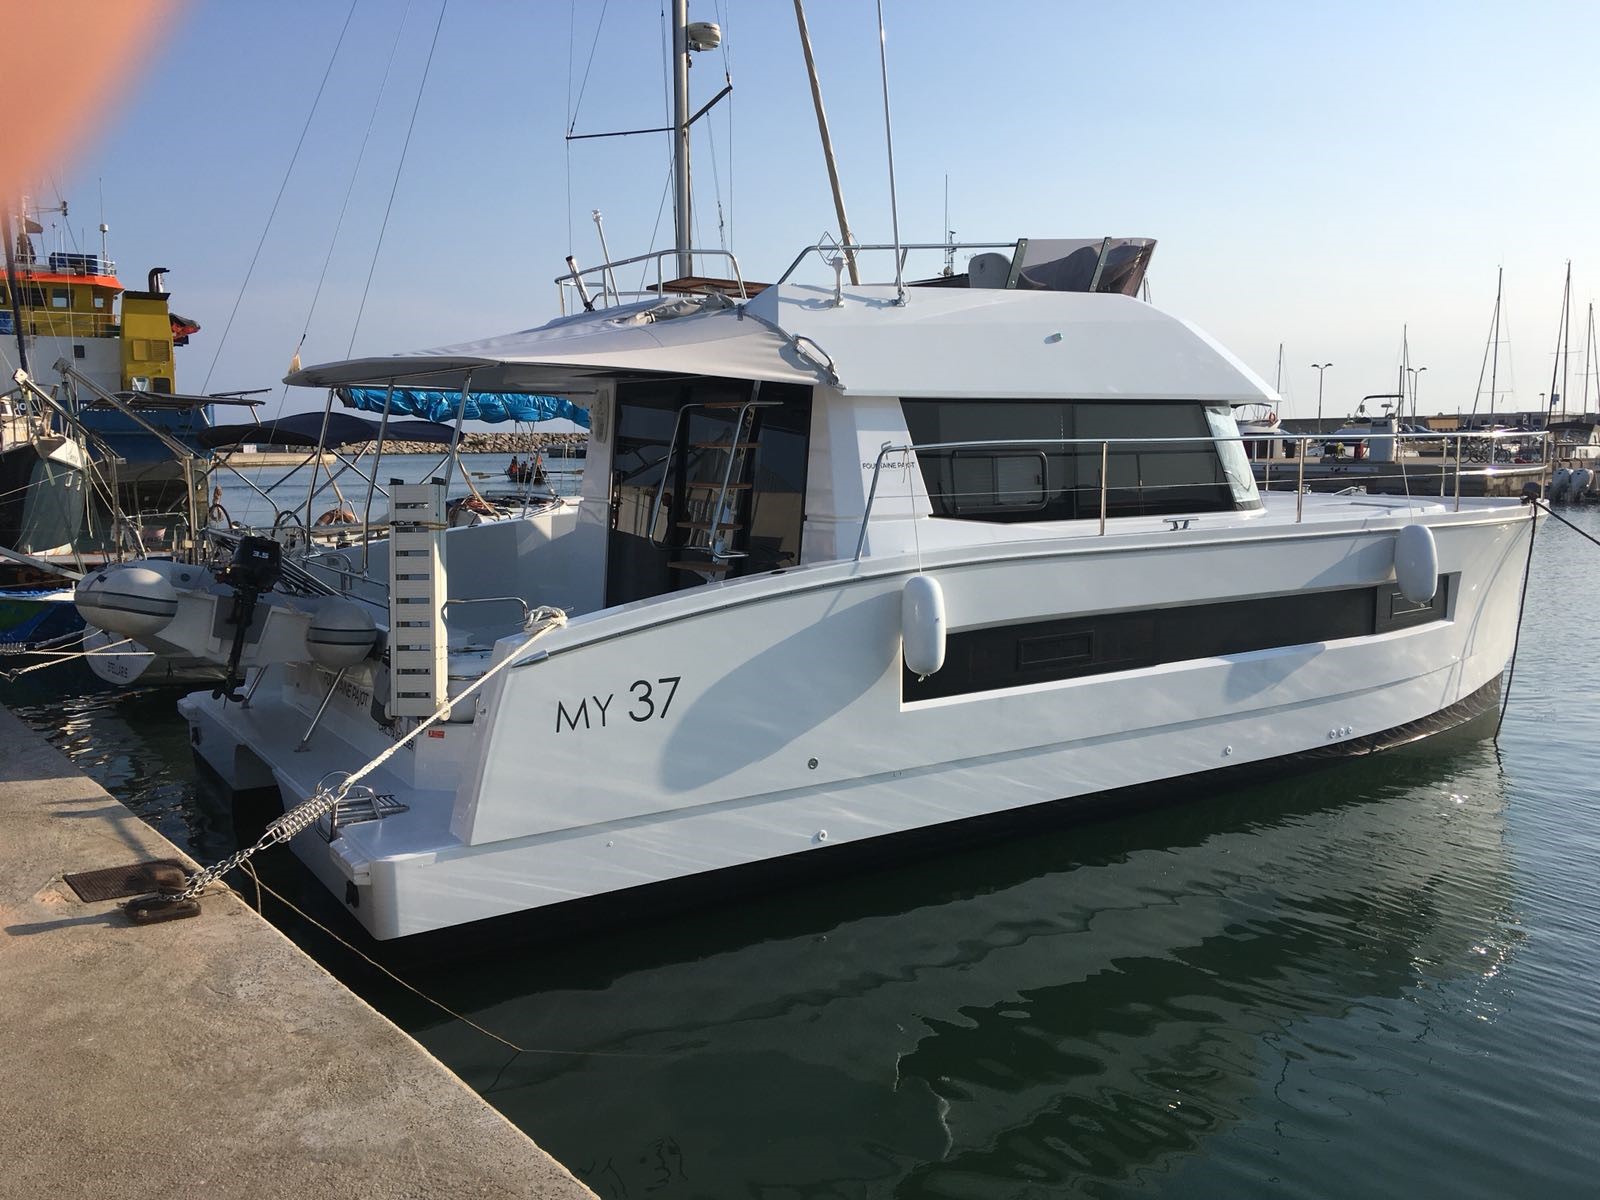 Power boat FOR CHARTER, year 2017 brand Fountaine Pajot Motor Yachts and model MY 37, available in Puerto Deportivo El Masnou El Masnou Barcelona España